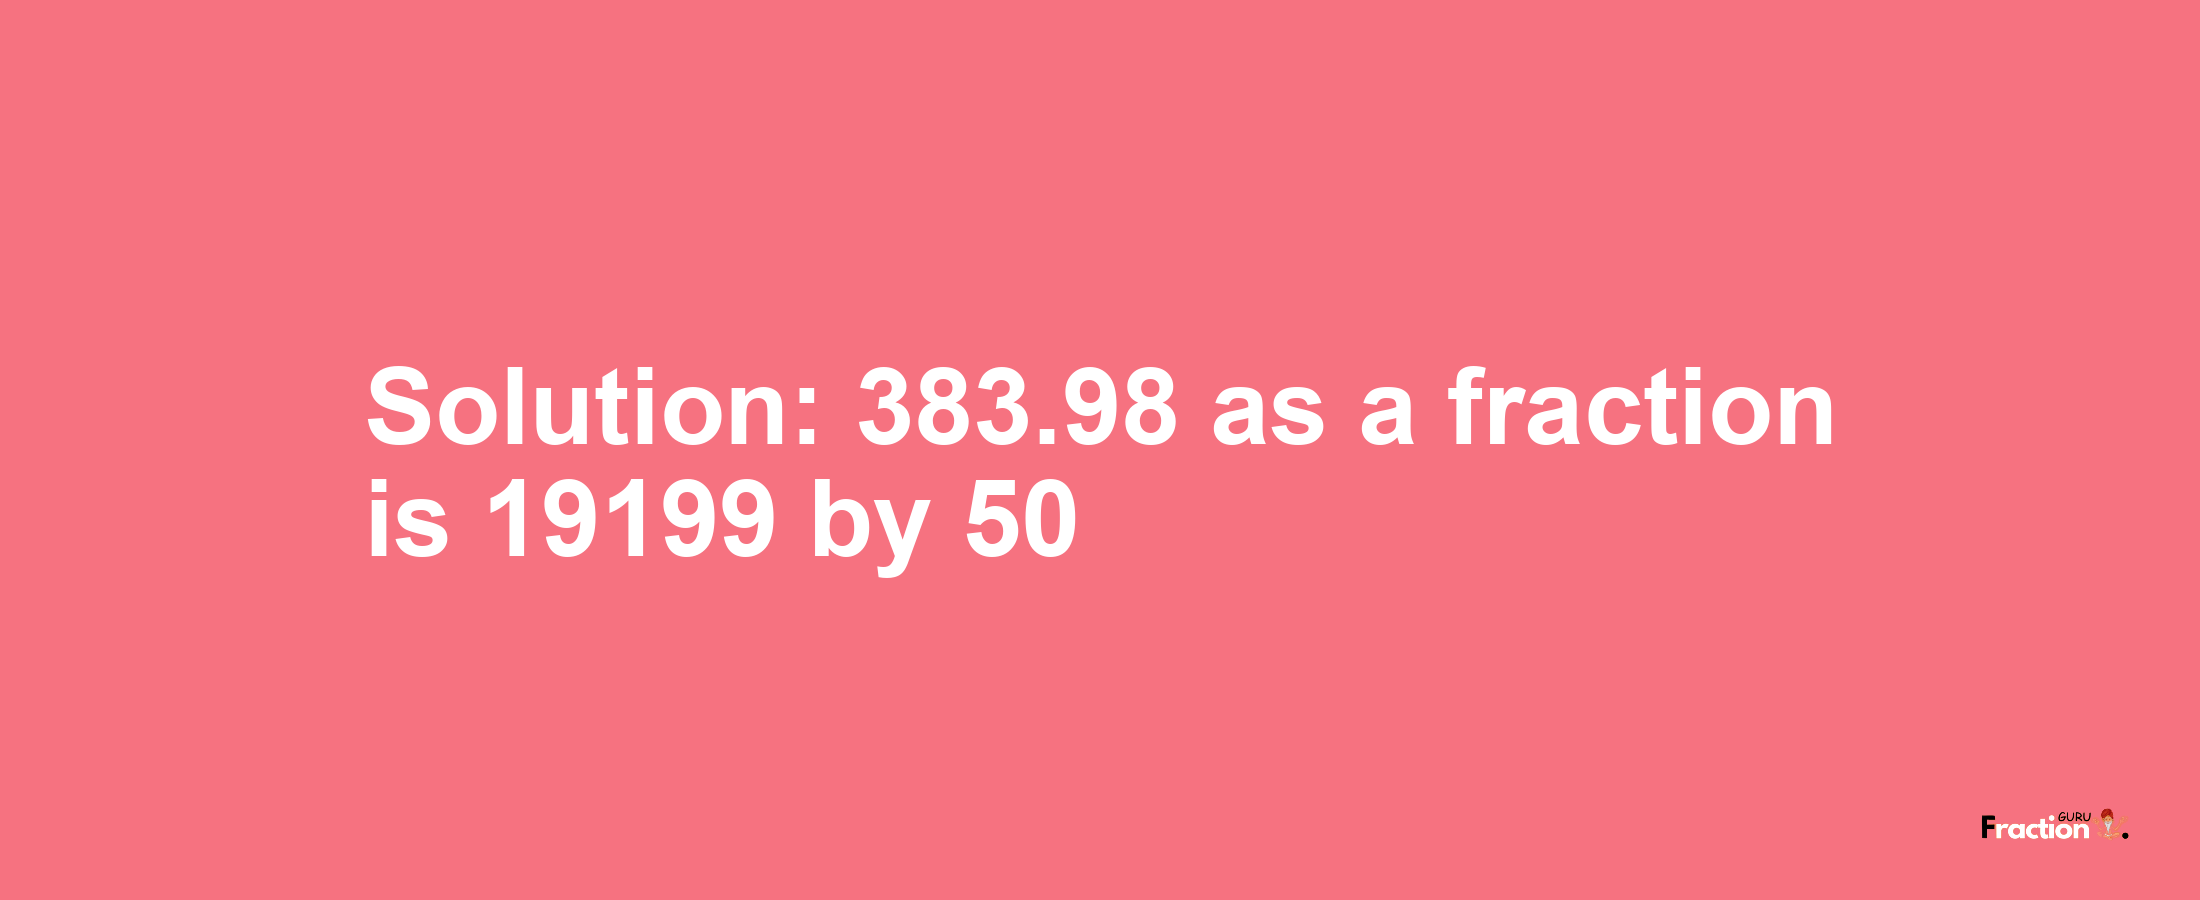 Solution:383.98 as a fraction is 19199/50